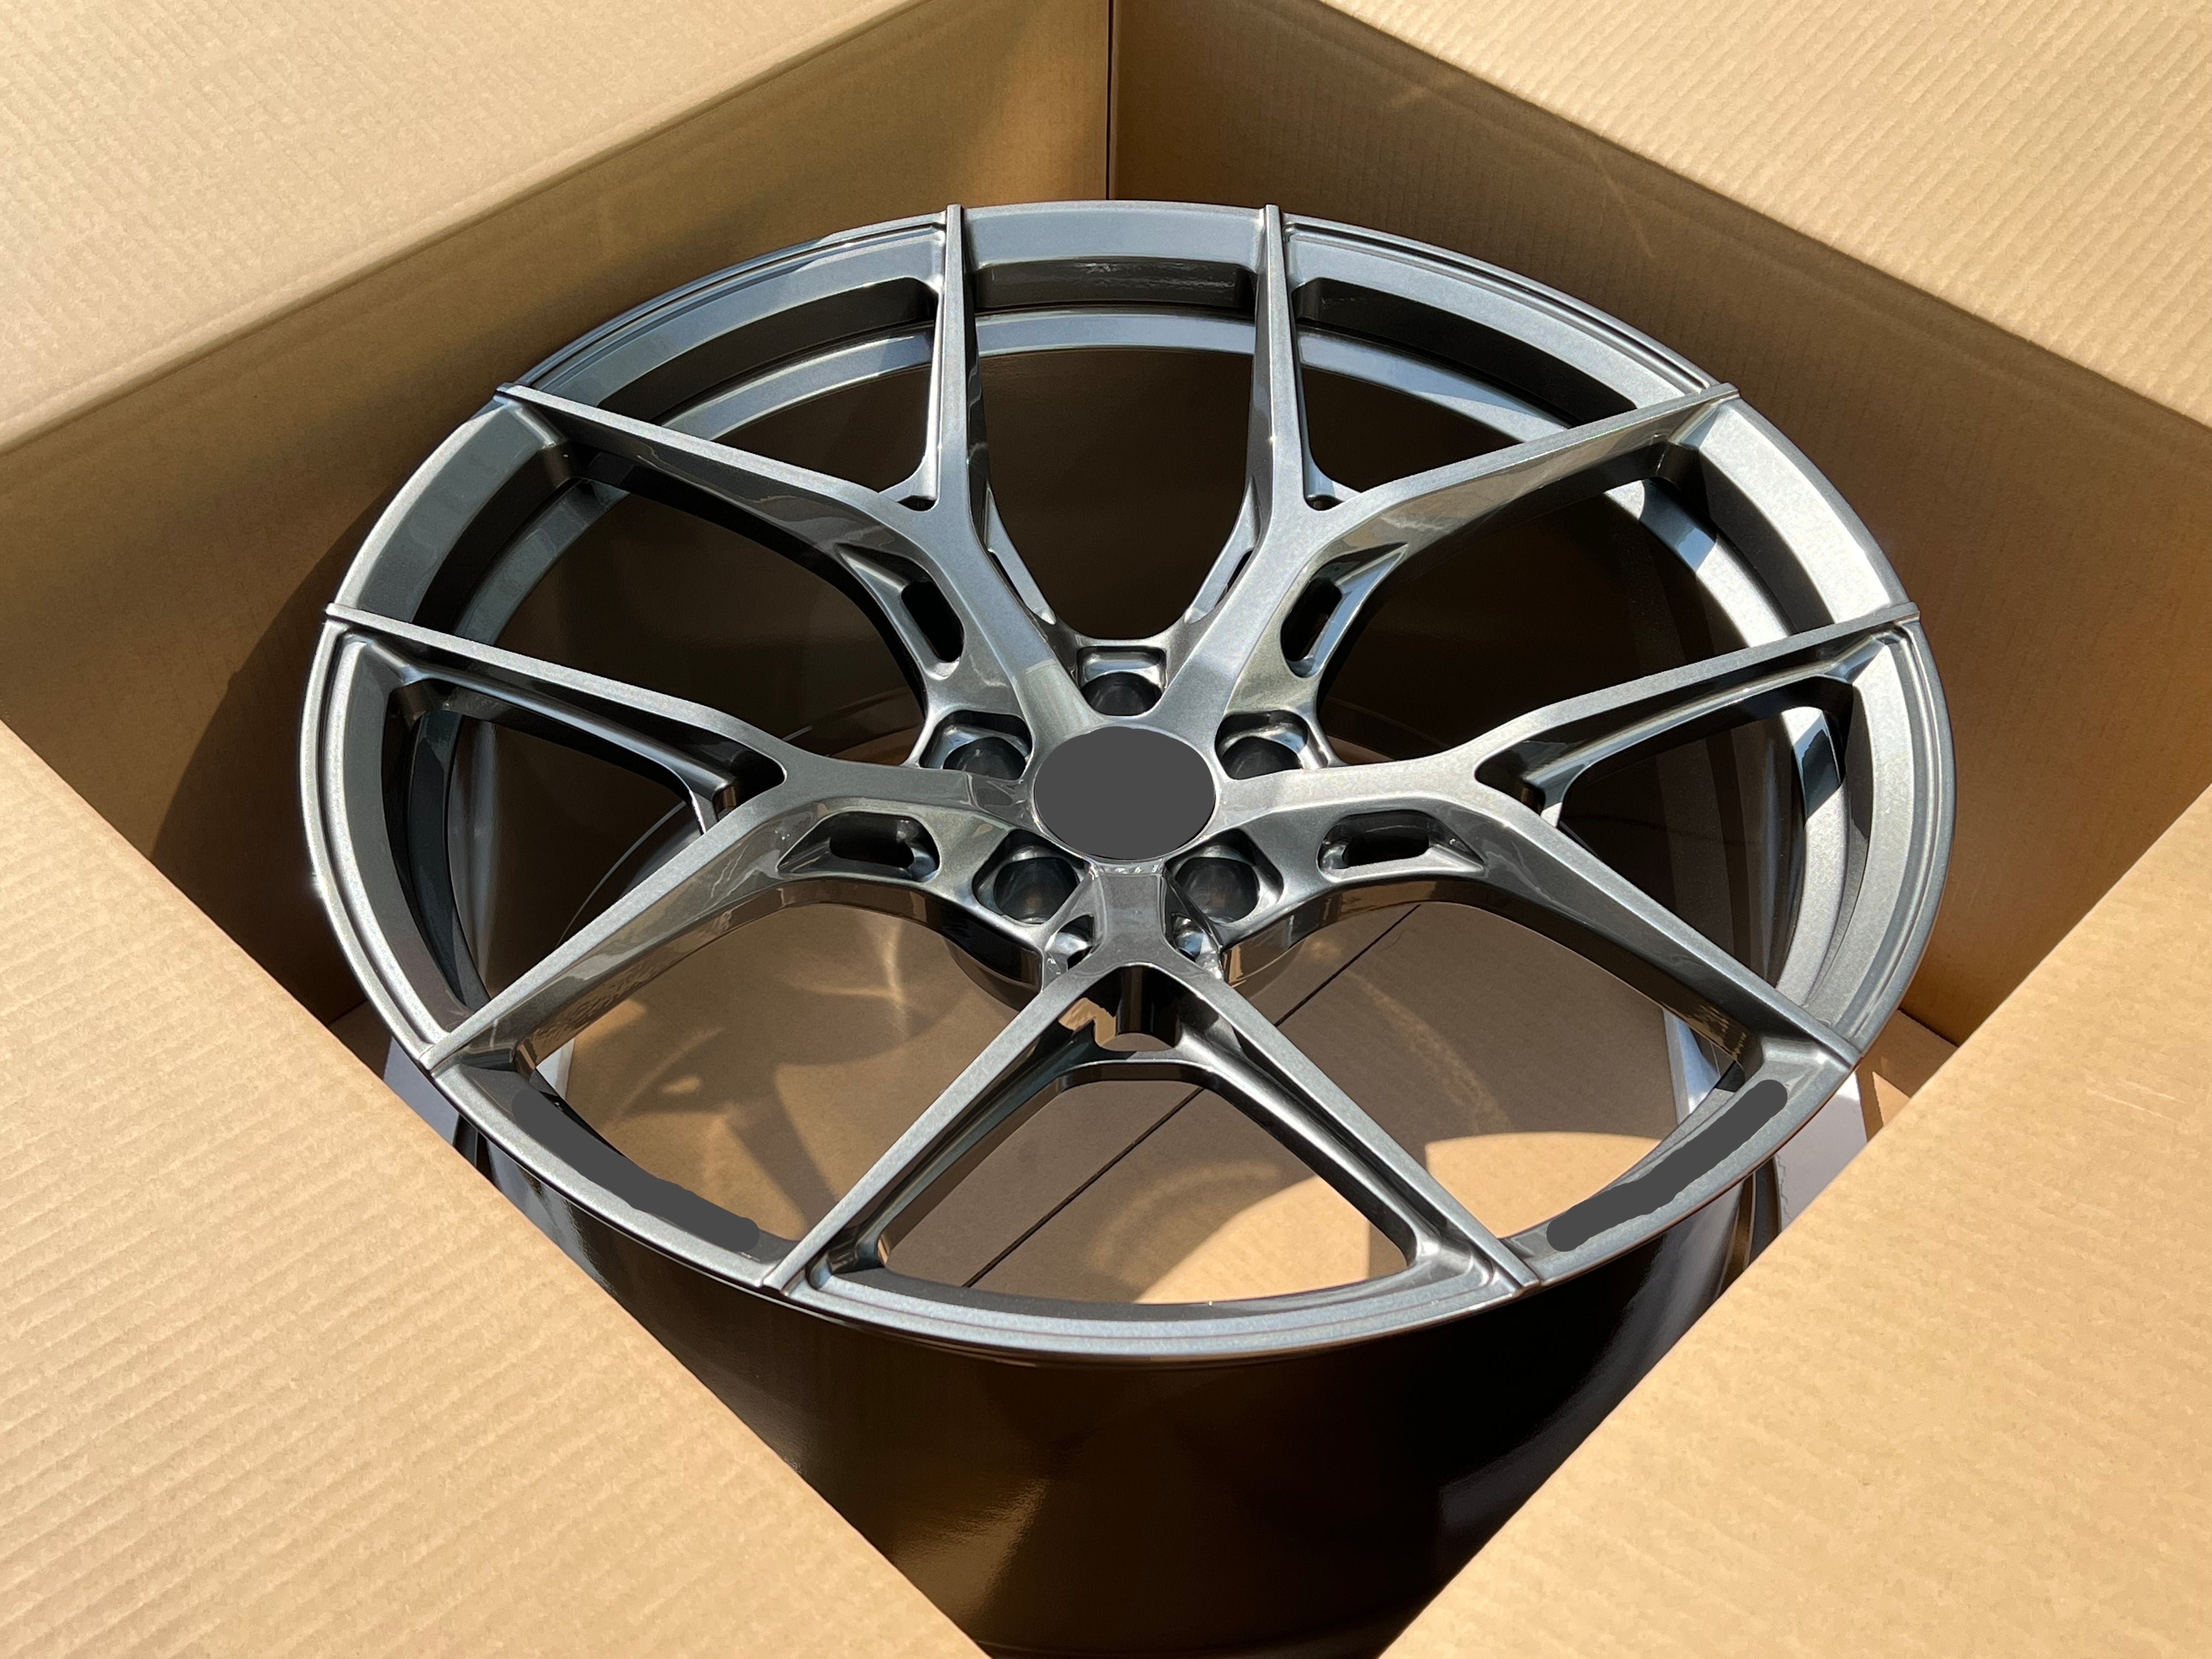 VOSSEN HF-5 FORGED WHEELS RIMS FOR AUDI RSQ8 – Forza Performance Group